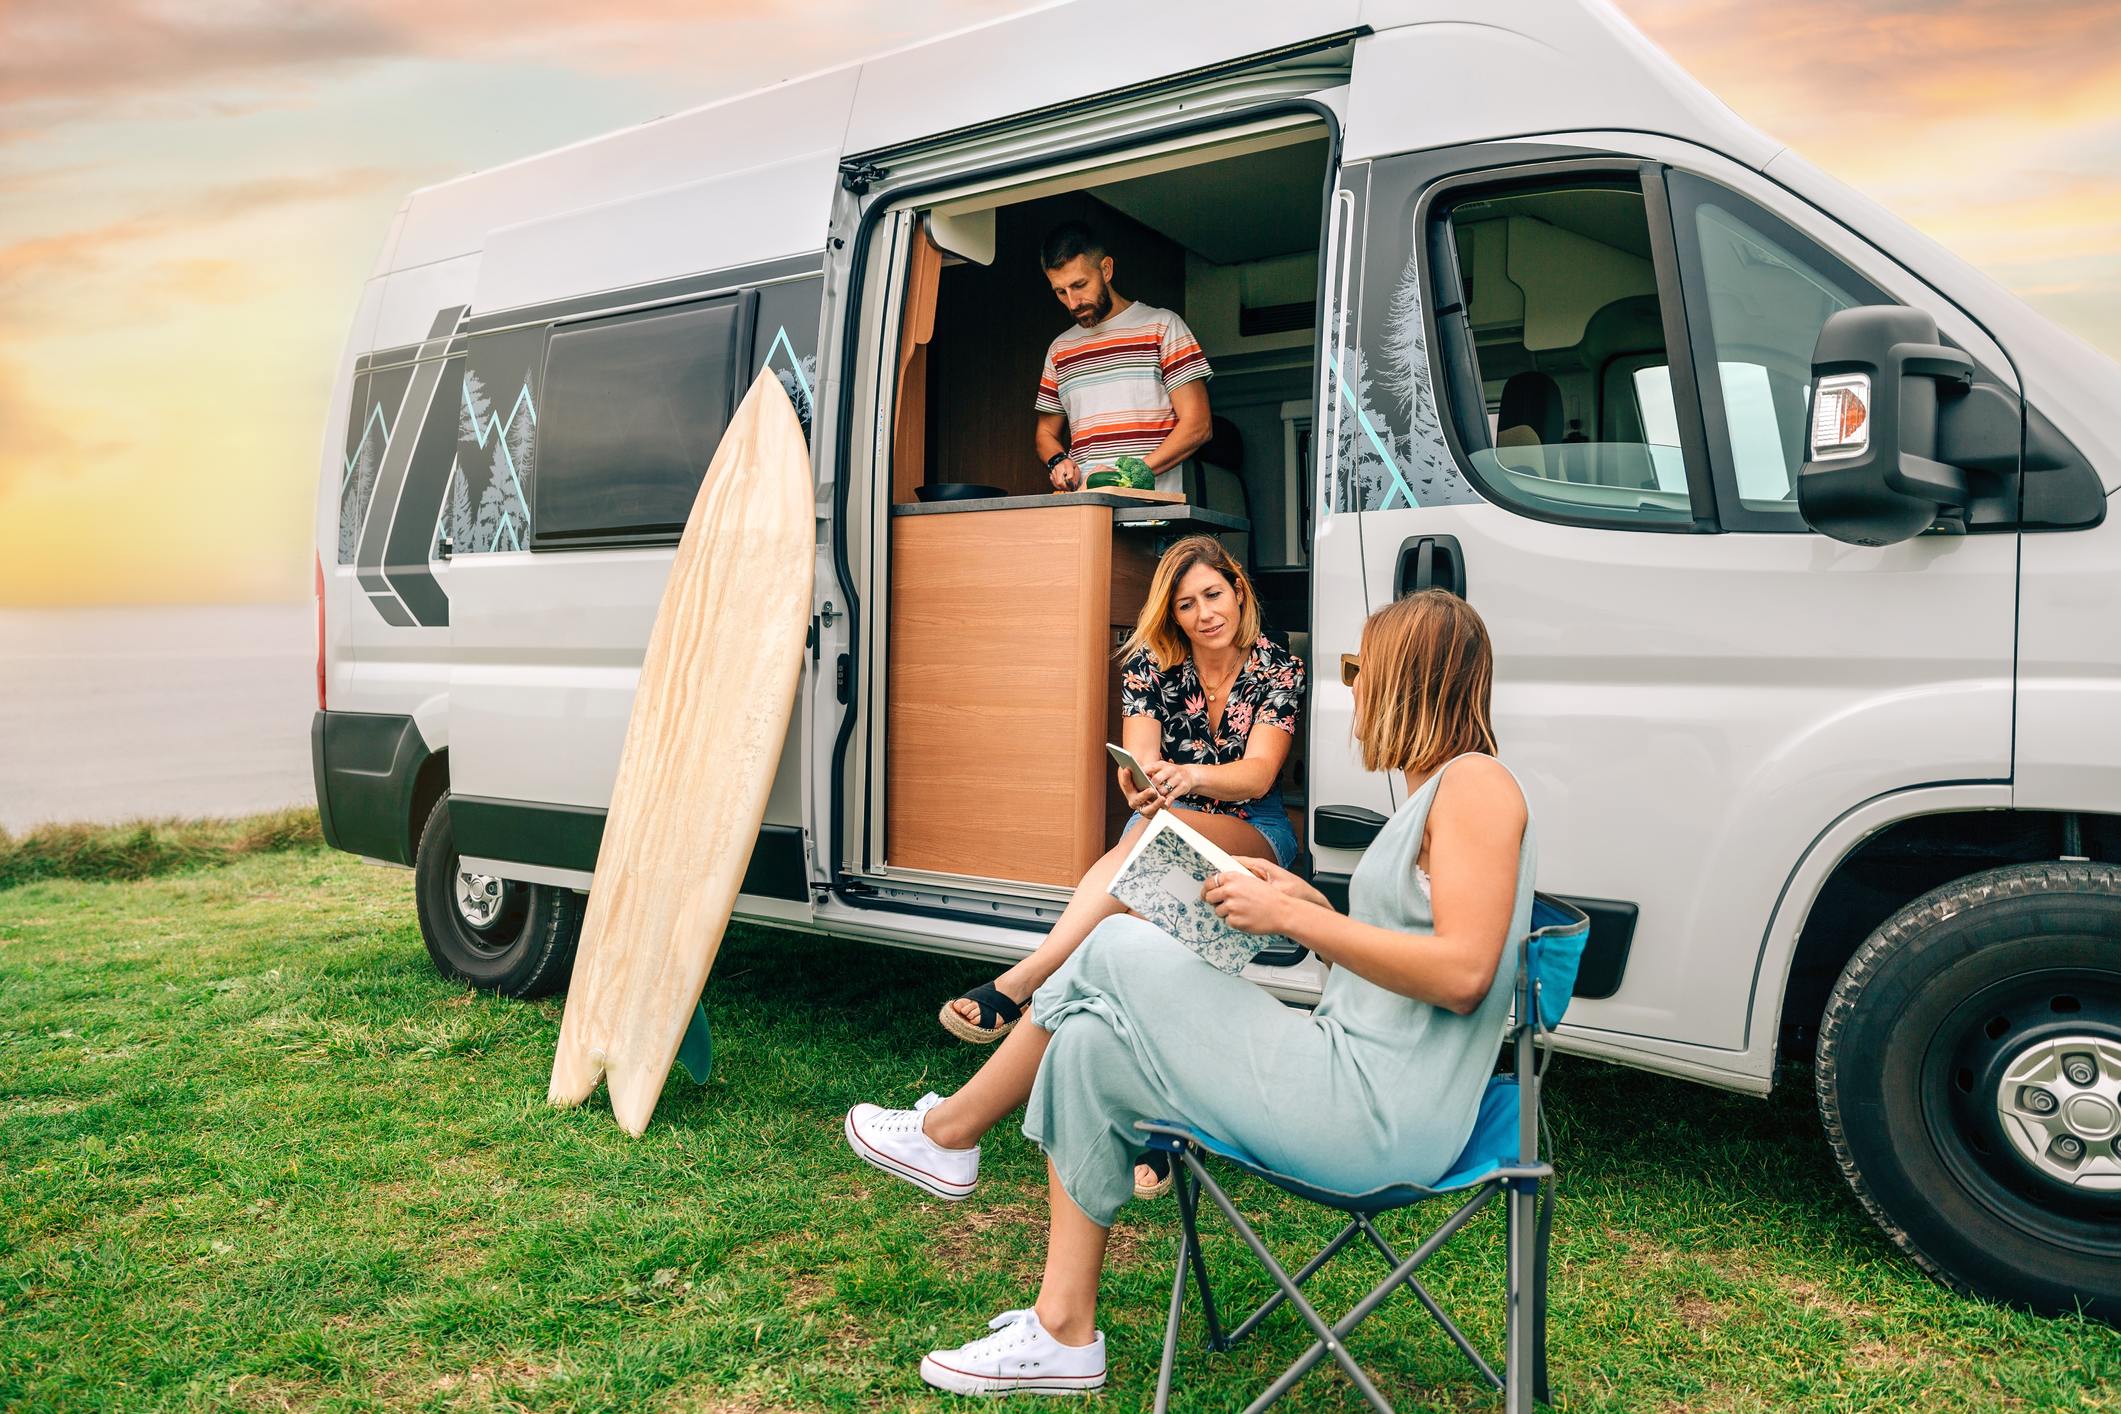 Focus on safety at massive caravan and outdoor expo